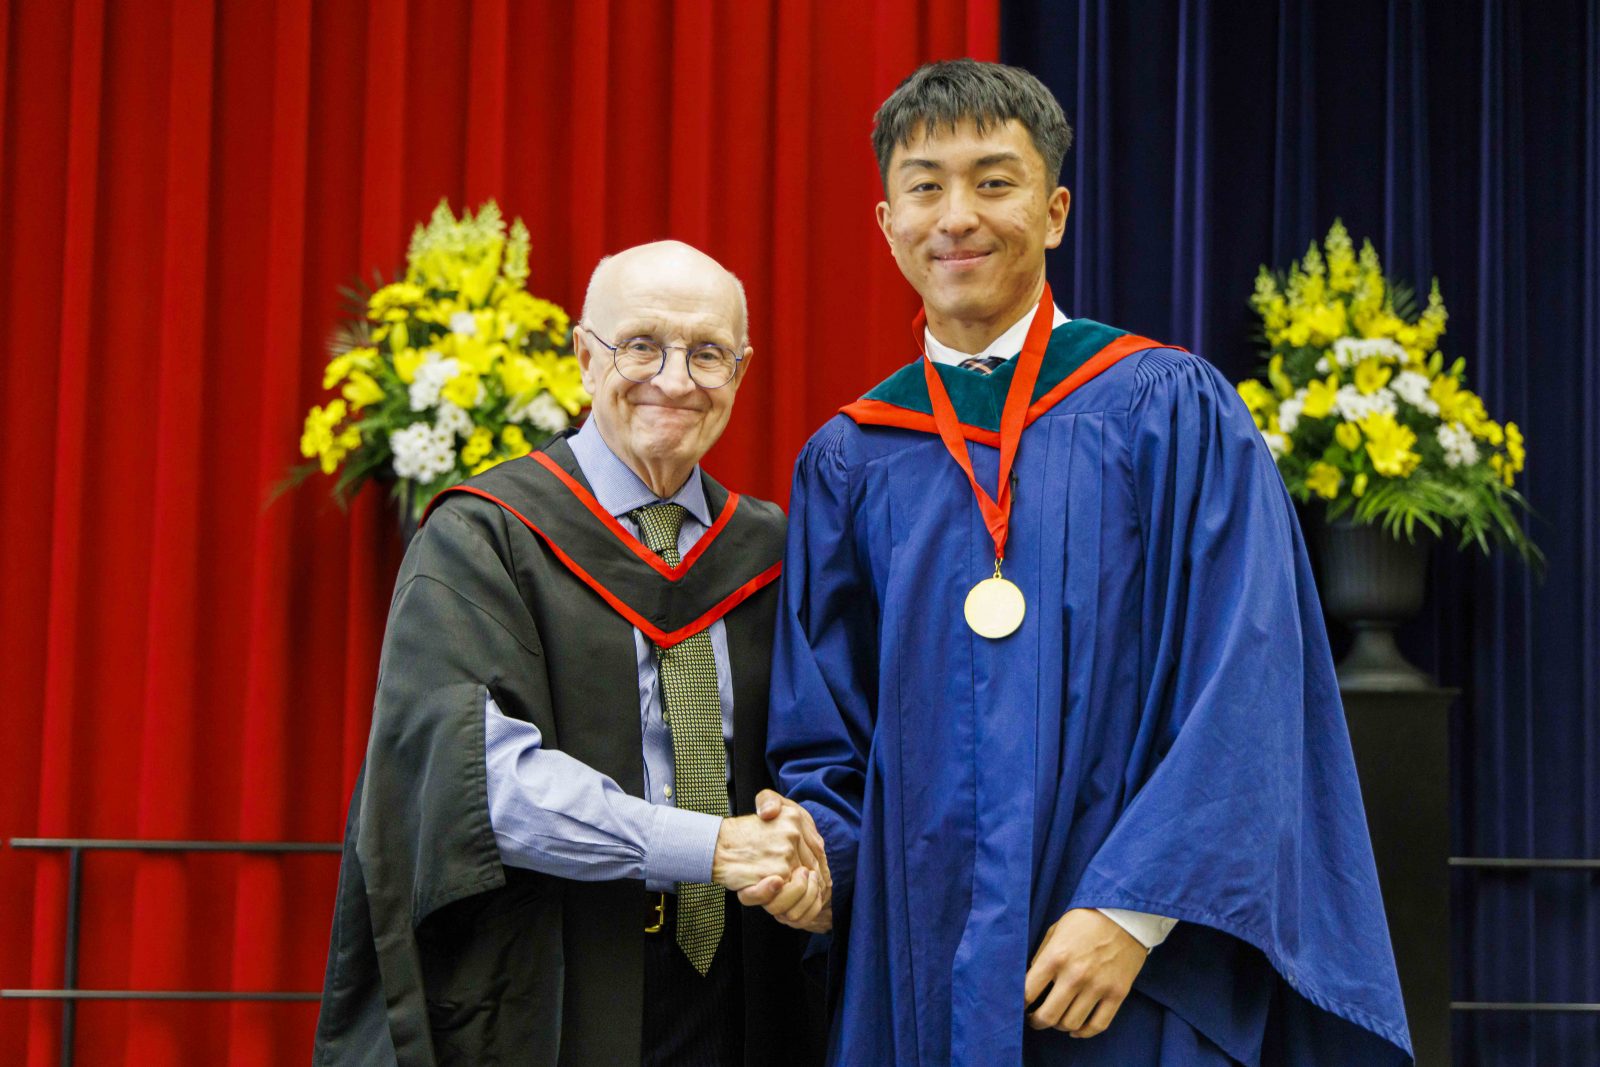 Bao (Bill) Huynh and Rob Welch shake hands on stage during Convocation.